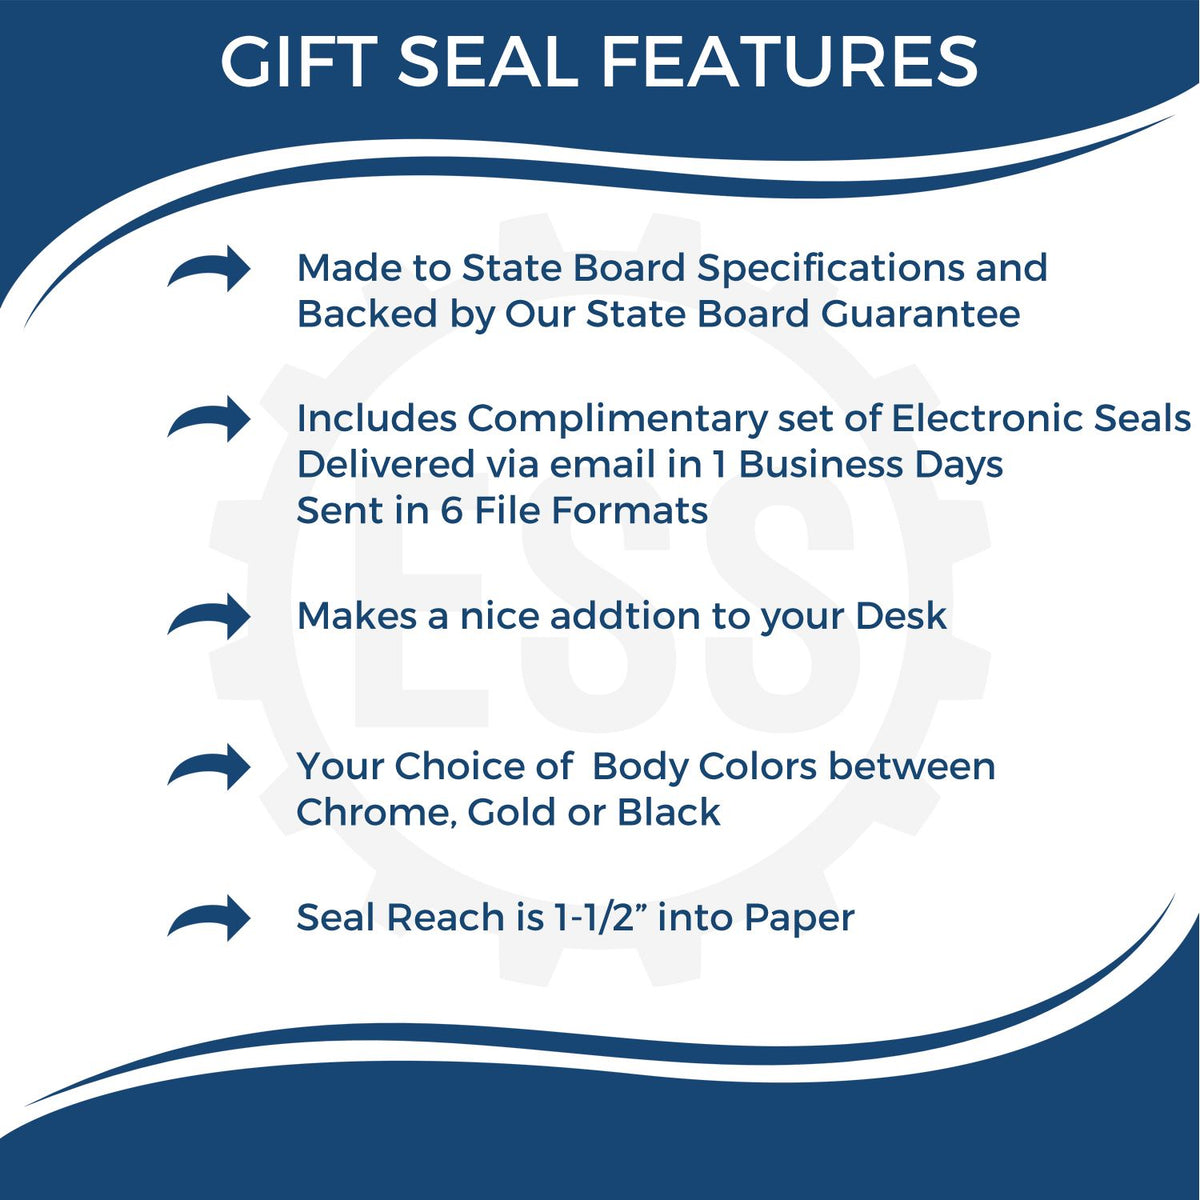 A picture of an infographic highlighting the selling points for the Gift North Carolina Engineer Seal